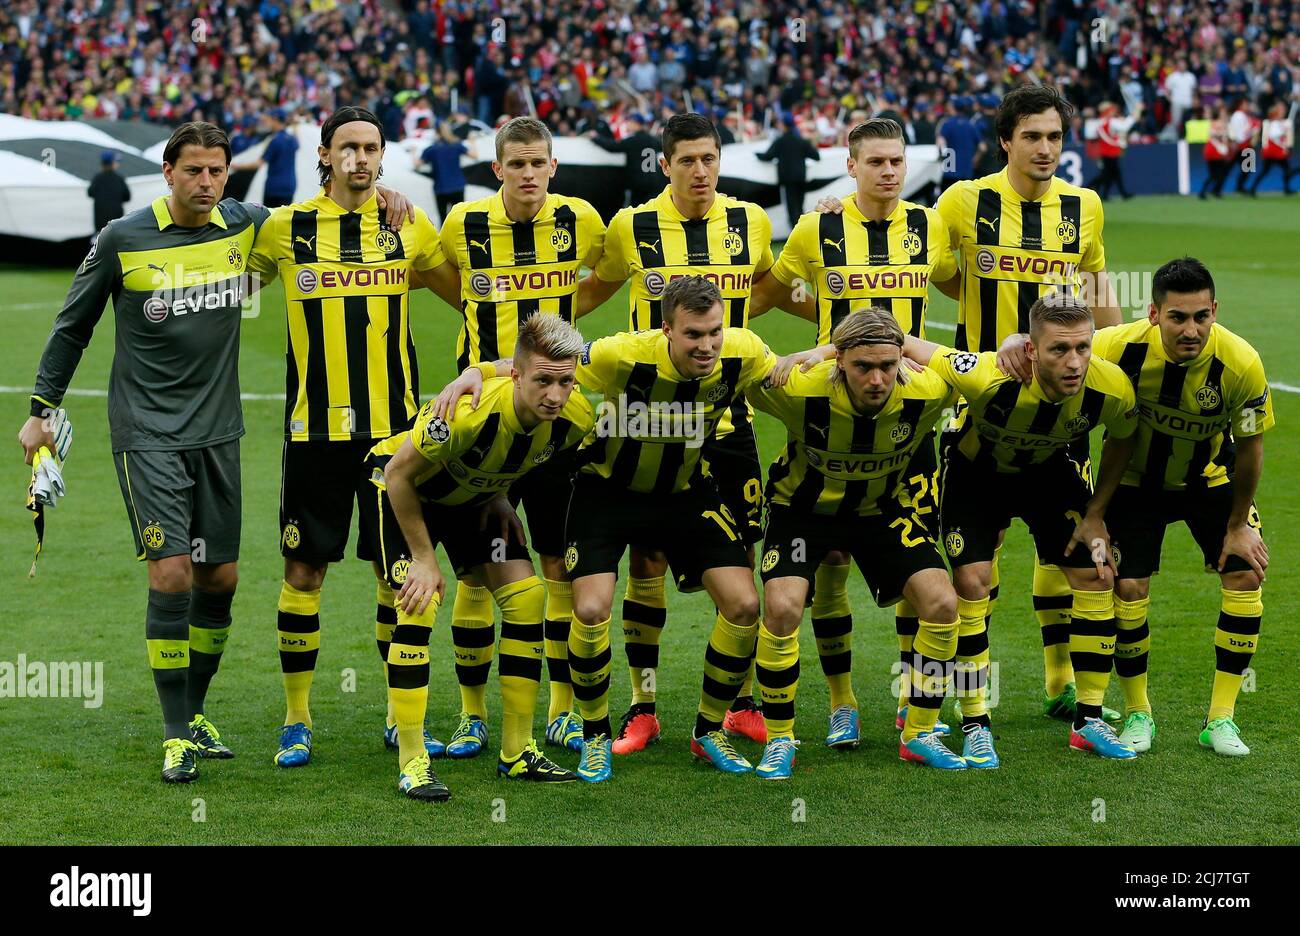 The Borussia Dortmund starting squad pose before their Champions League  Final soccer match against Bayern Munich at Wembley Stadium in London May  25, 2013. REUTERS/Stefan Wermuth (BRITAIN - Tags: SPORT SOCCER Stock